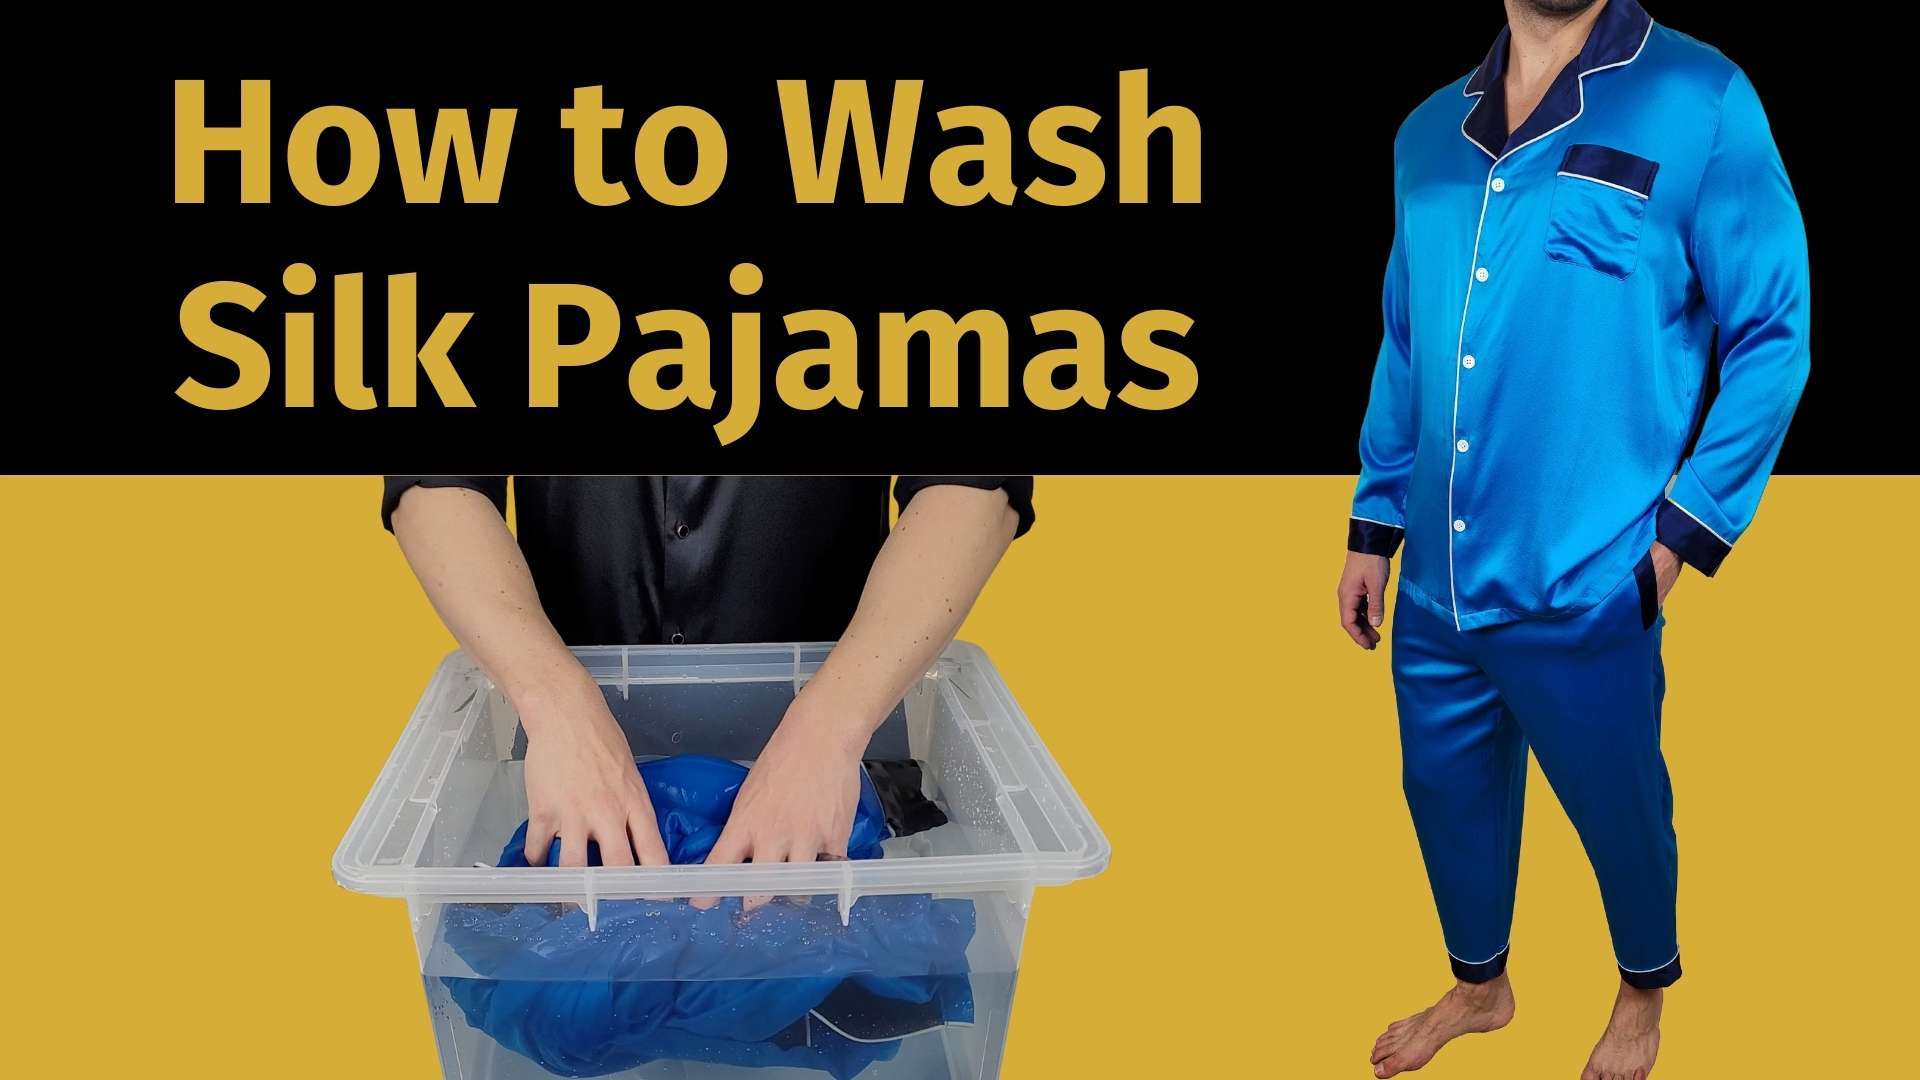 how to wash silk pajamas banner image with a picture of a man hand washing blue silk pajamas in a bucket full of lukewarm water